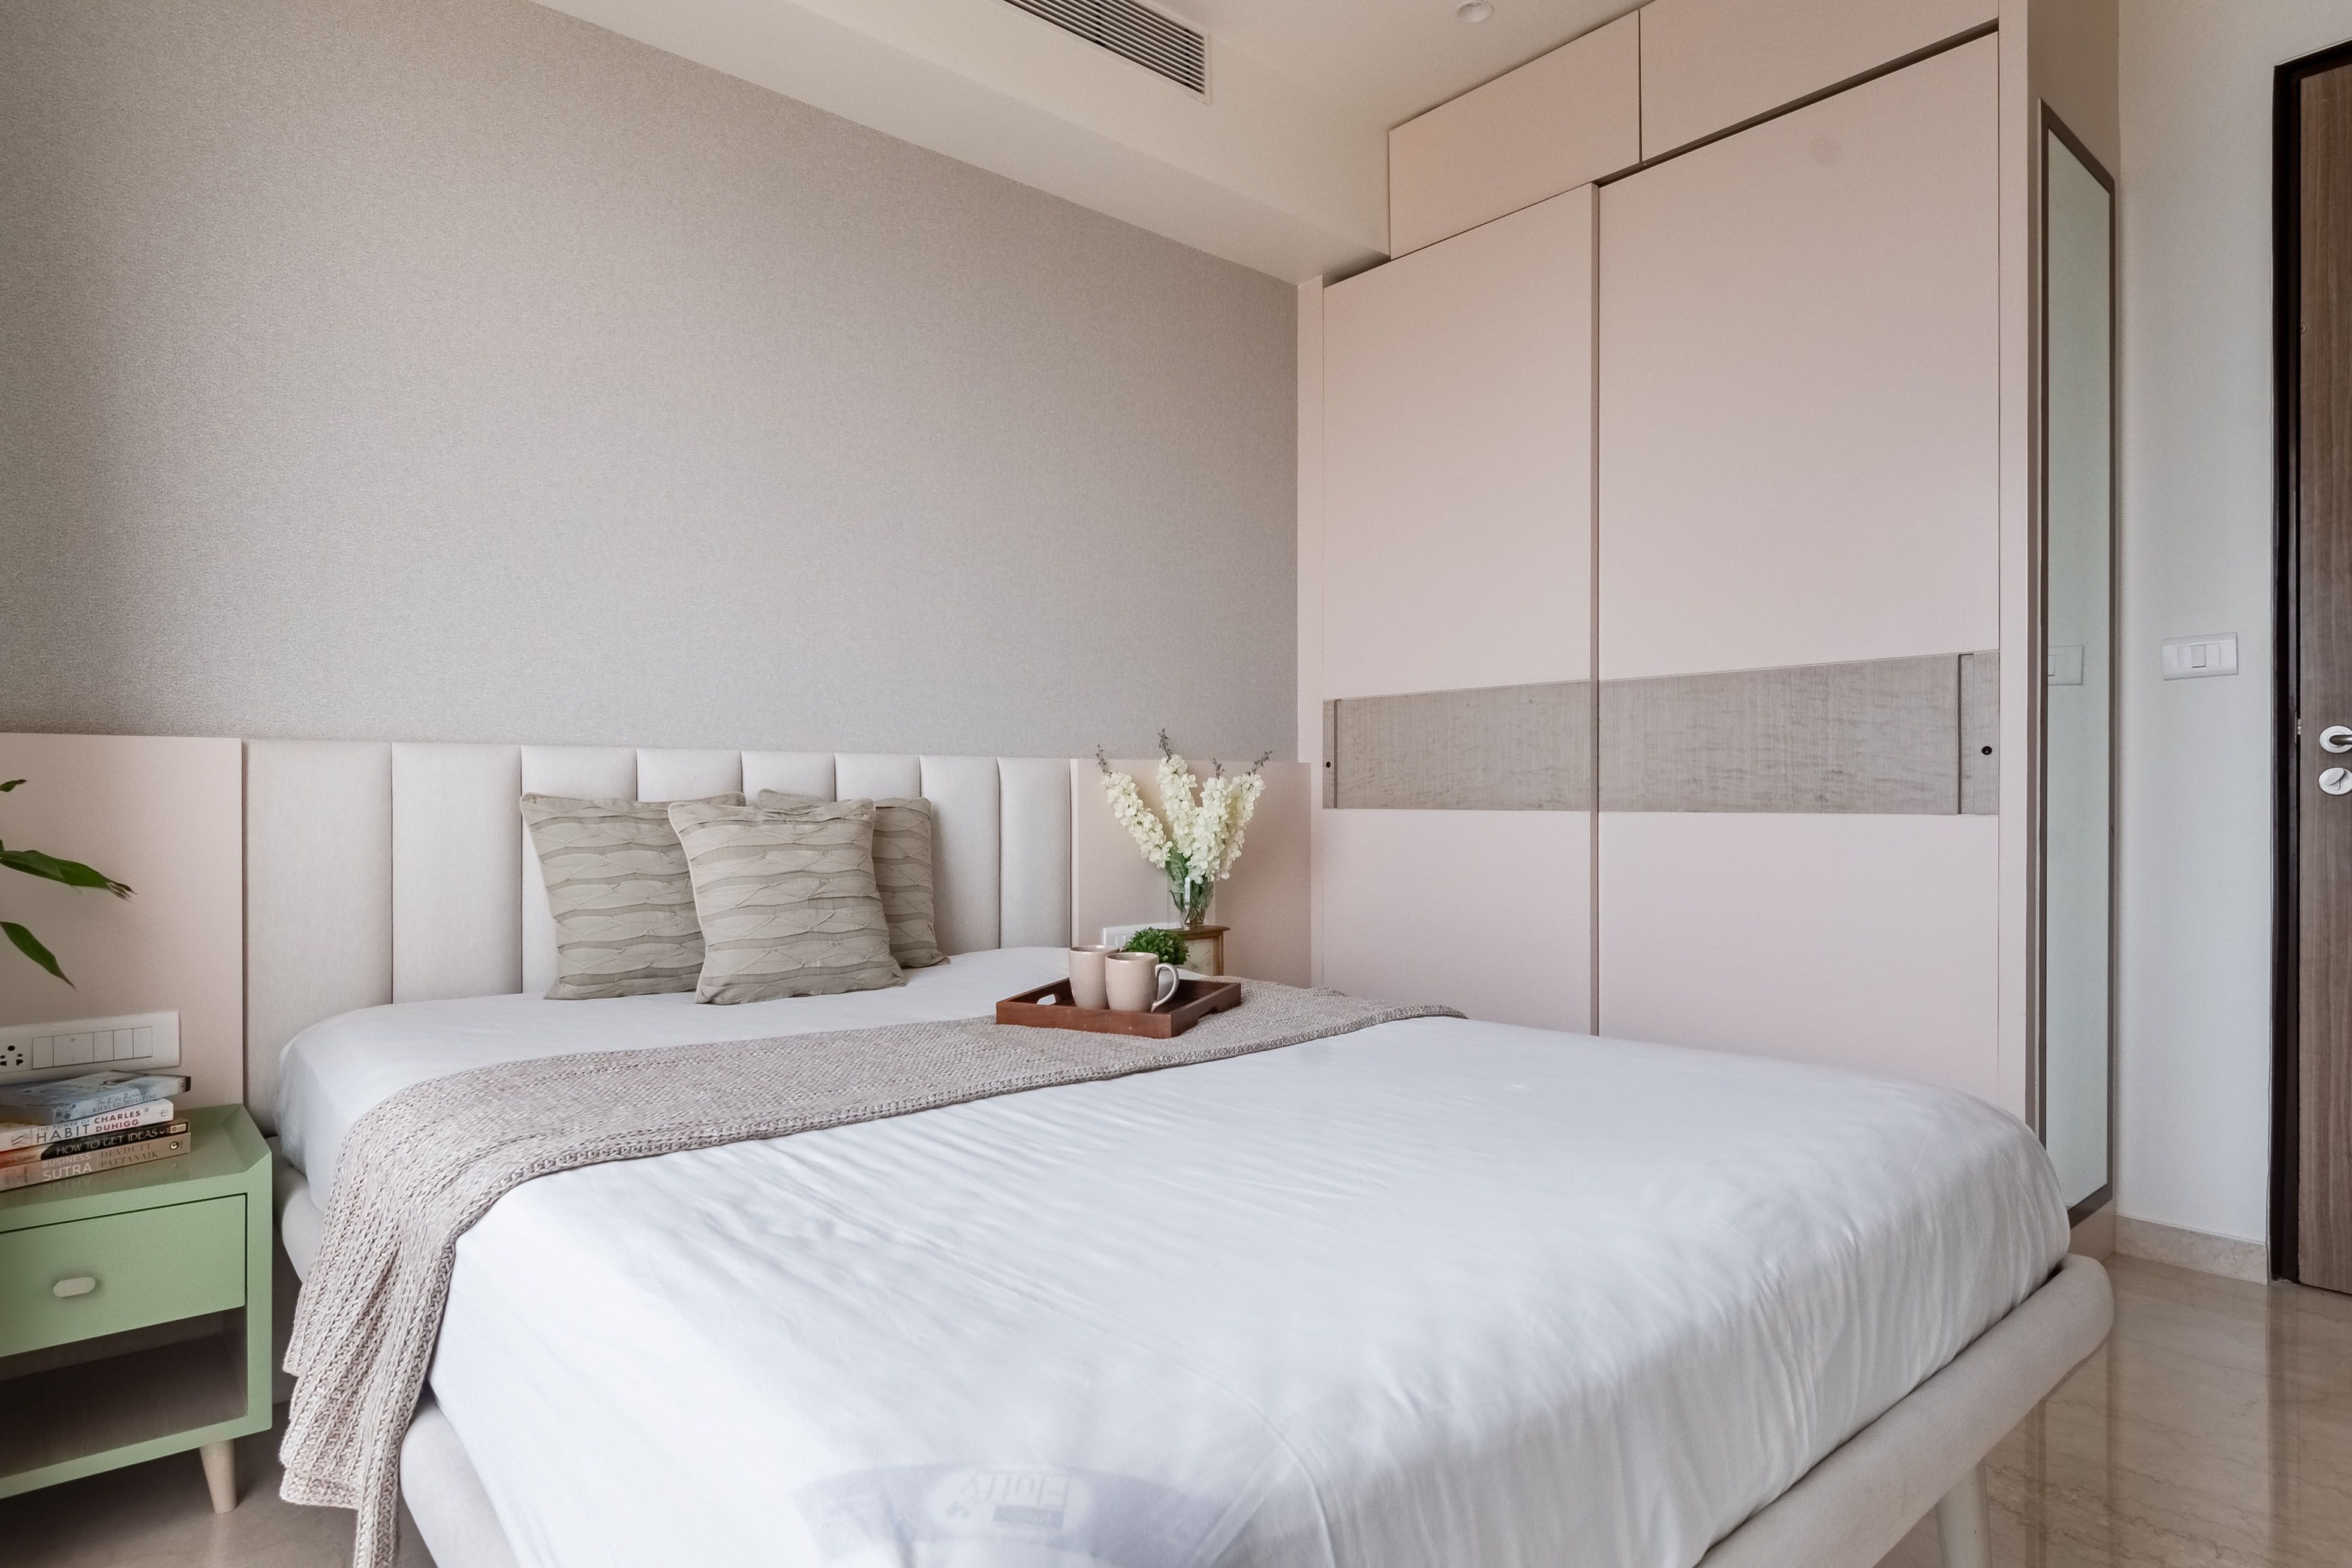 Modern Guest Room Design With Light Pink And Wood Sliding Wardrobe